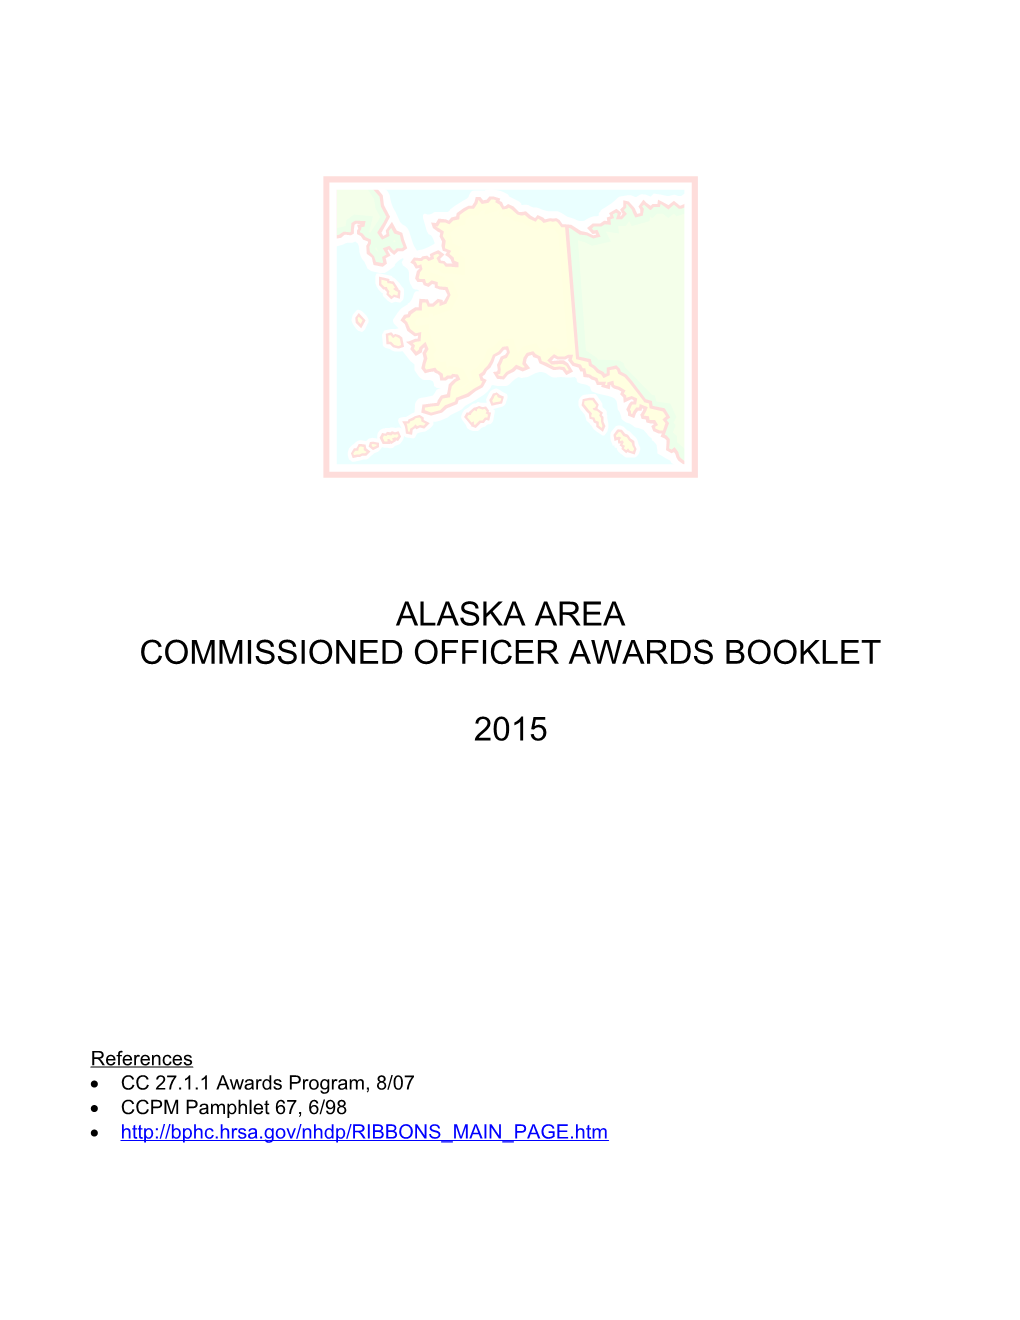 AK Area Commissioned Officer Awards Checklist